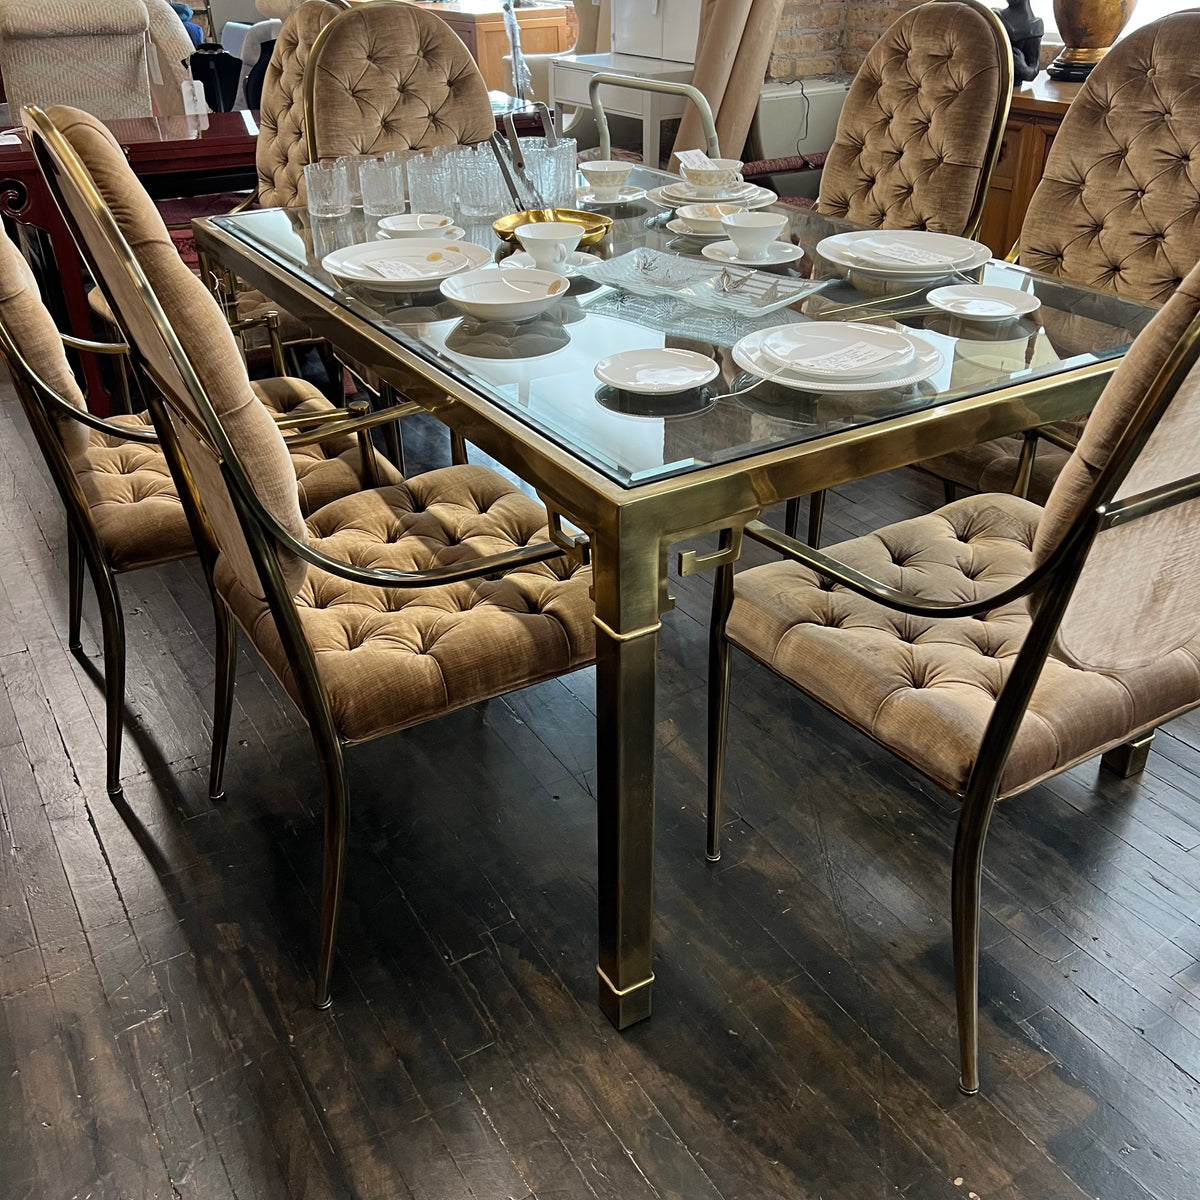 Mastercraft brass greek key dining table with glass tabletop.  Vintage midcentury dining table.  Hollywood Regency - Hollywood Glam.  Palm Beach, Palm Springs